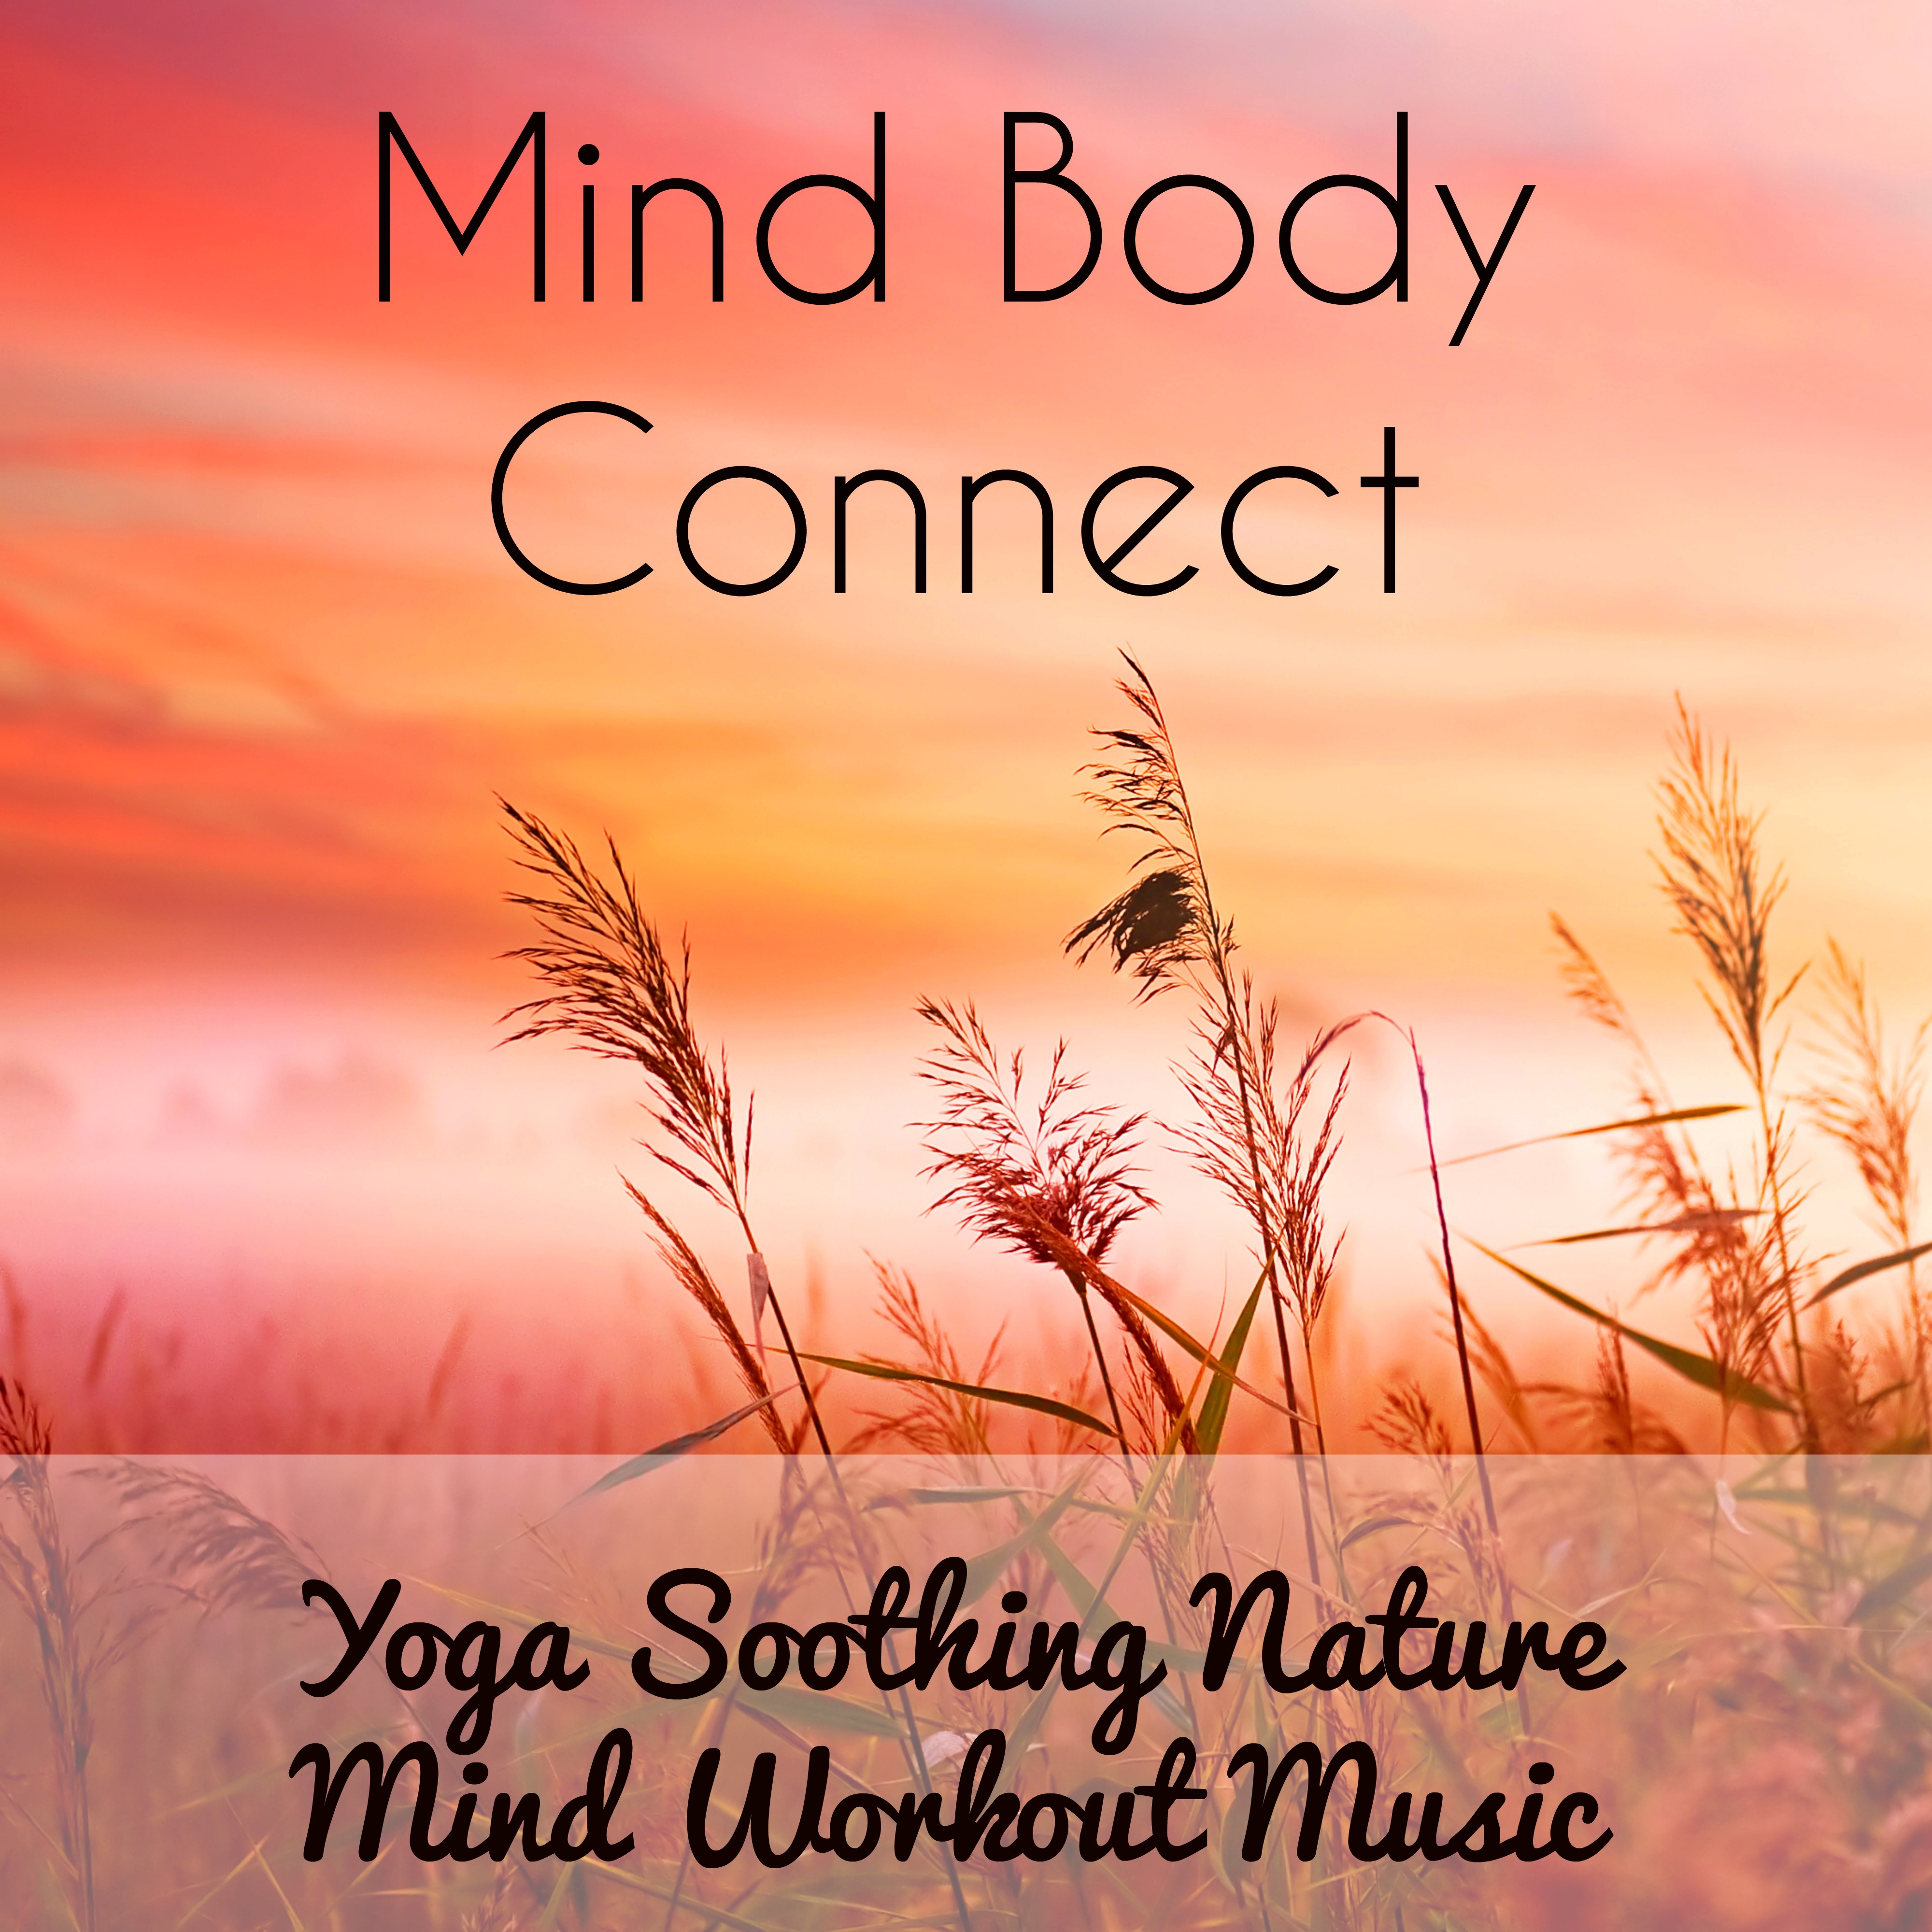 Mind Body Connect - Yoga Soothing Nature Mind Workout Music to Open Your Heart Chakra Healing and Mindfulness Meditation